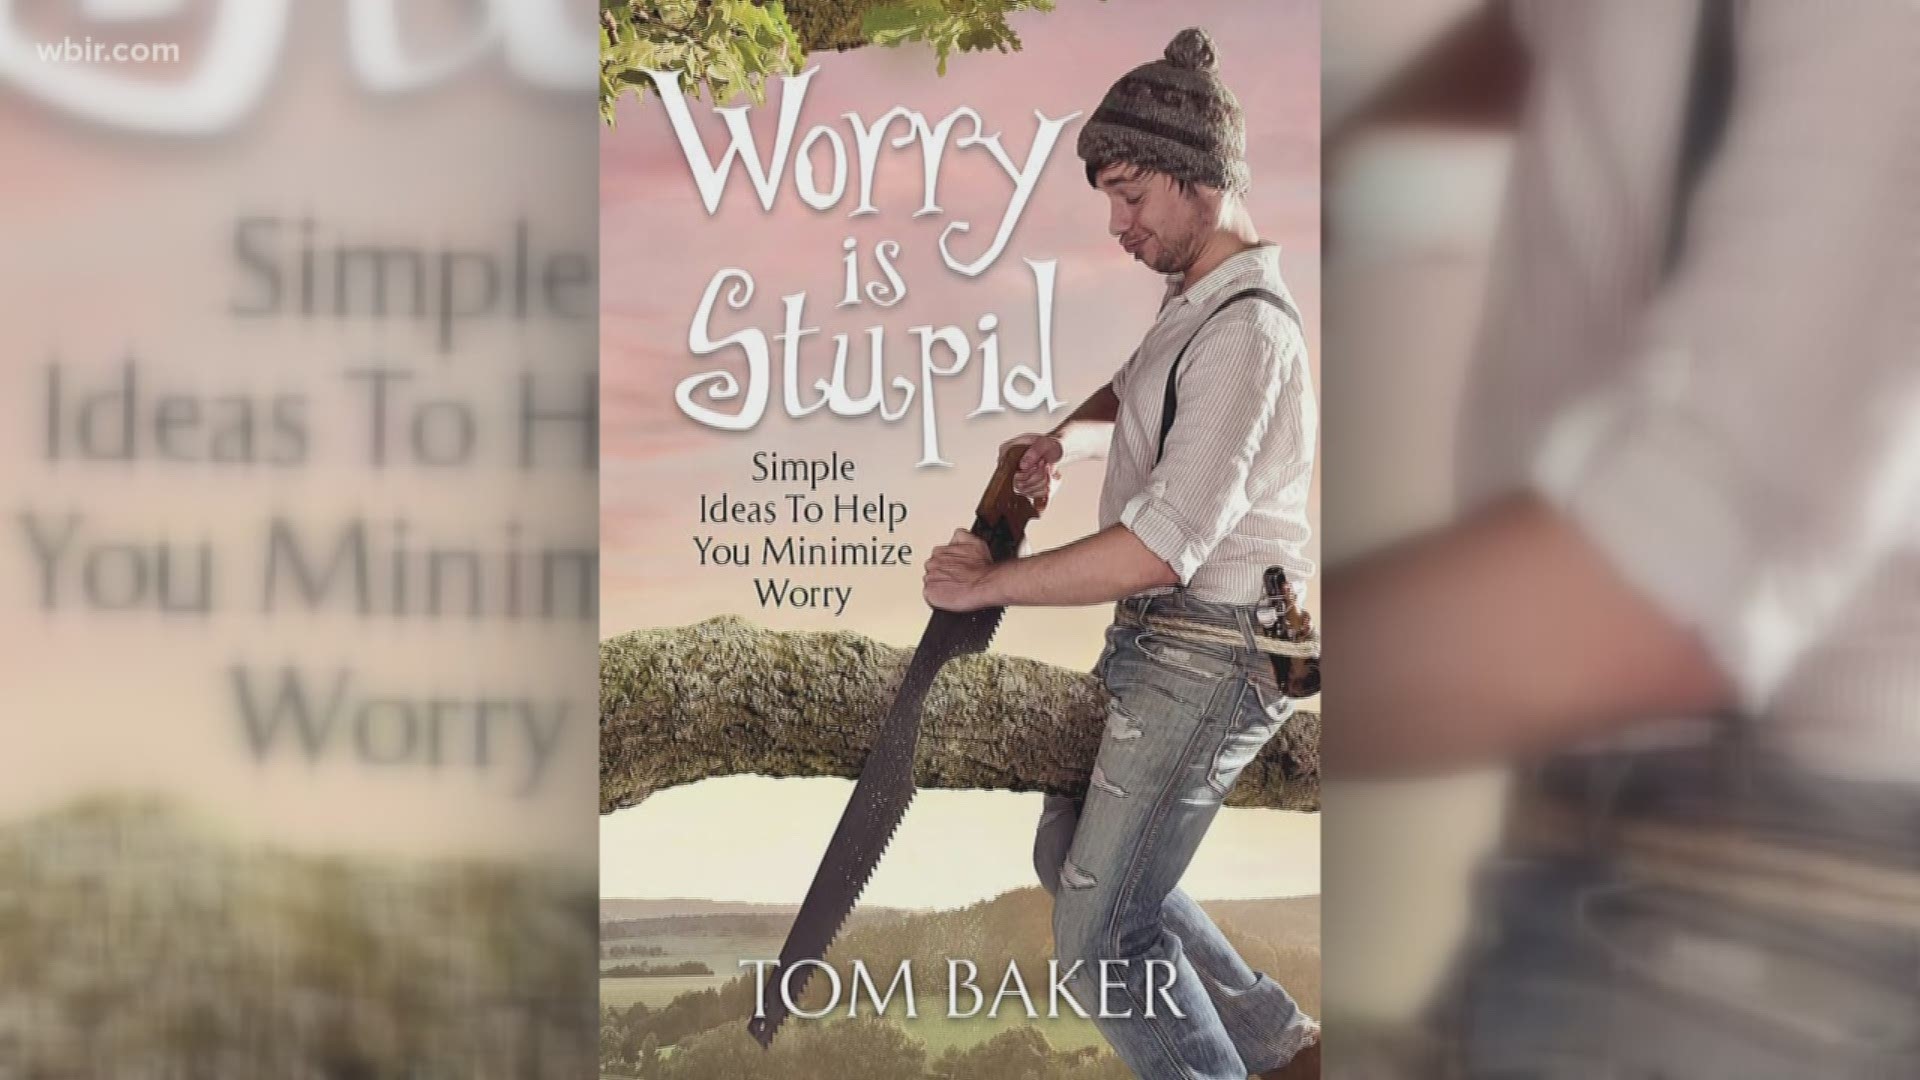 Author Tom Baker has a new book titled "Worry is Stupid". It's on sale now on Amazon. Learn more at tombakerspeaker.com. April 23, 2019-4pm